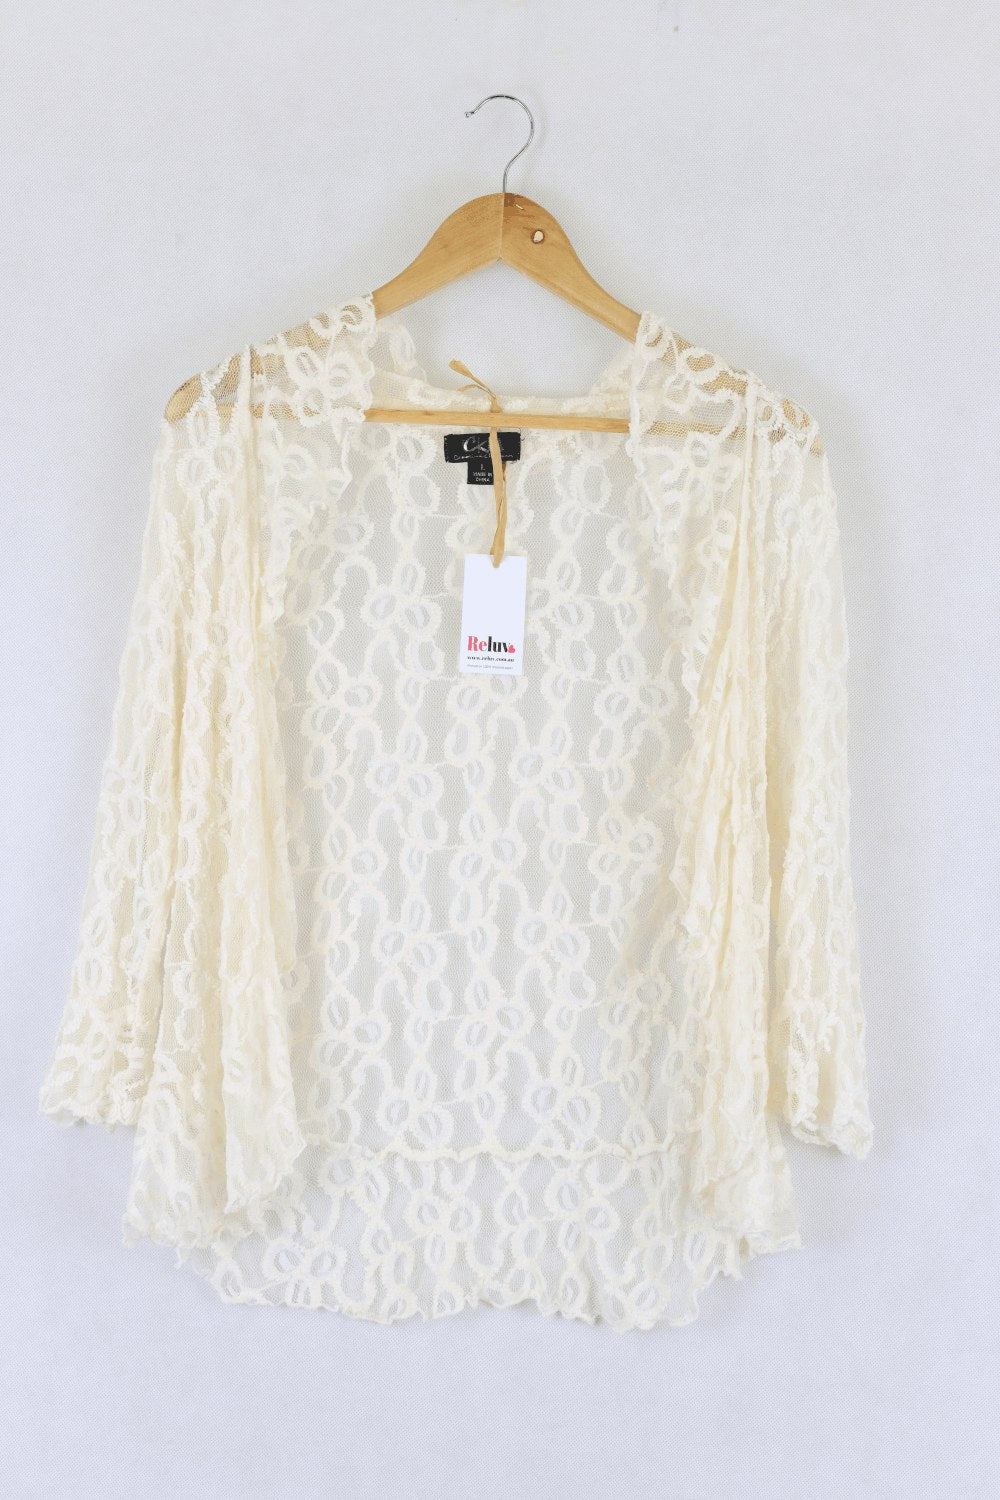 Ckm White Lace Cardigan L